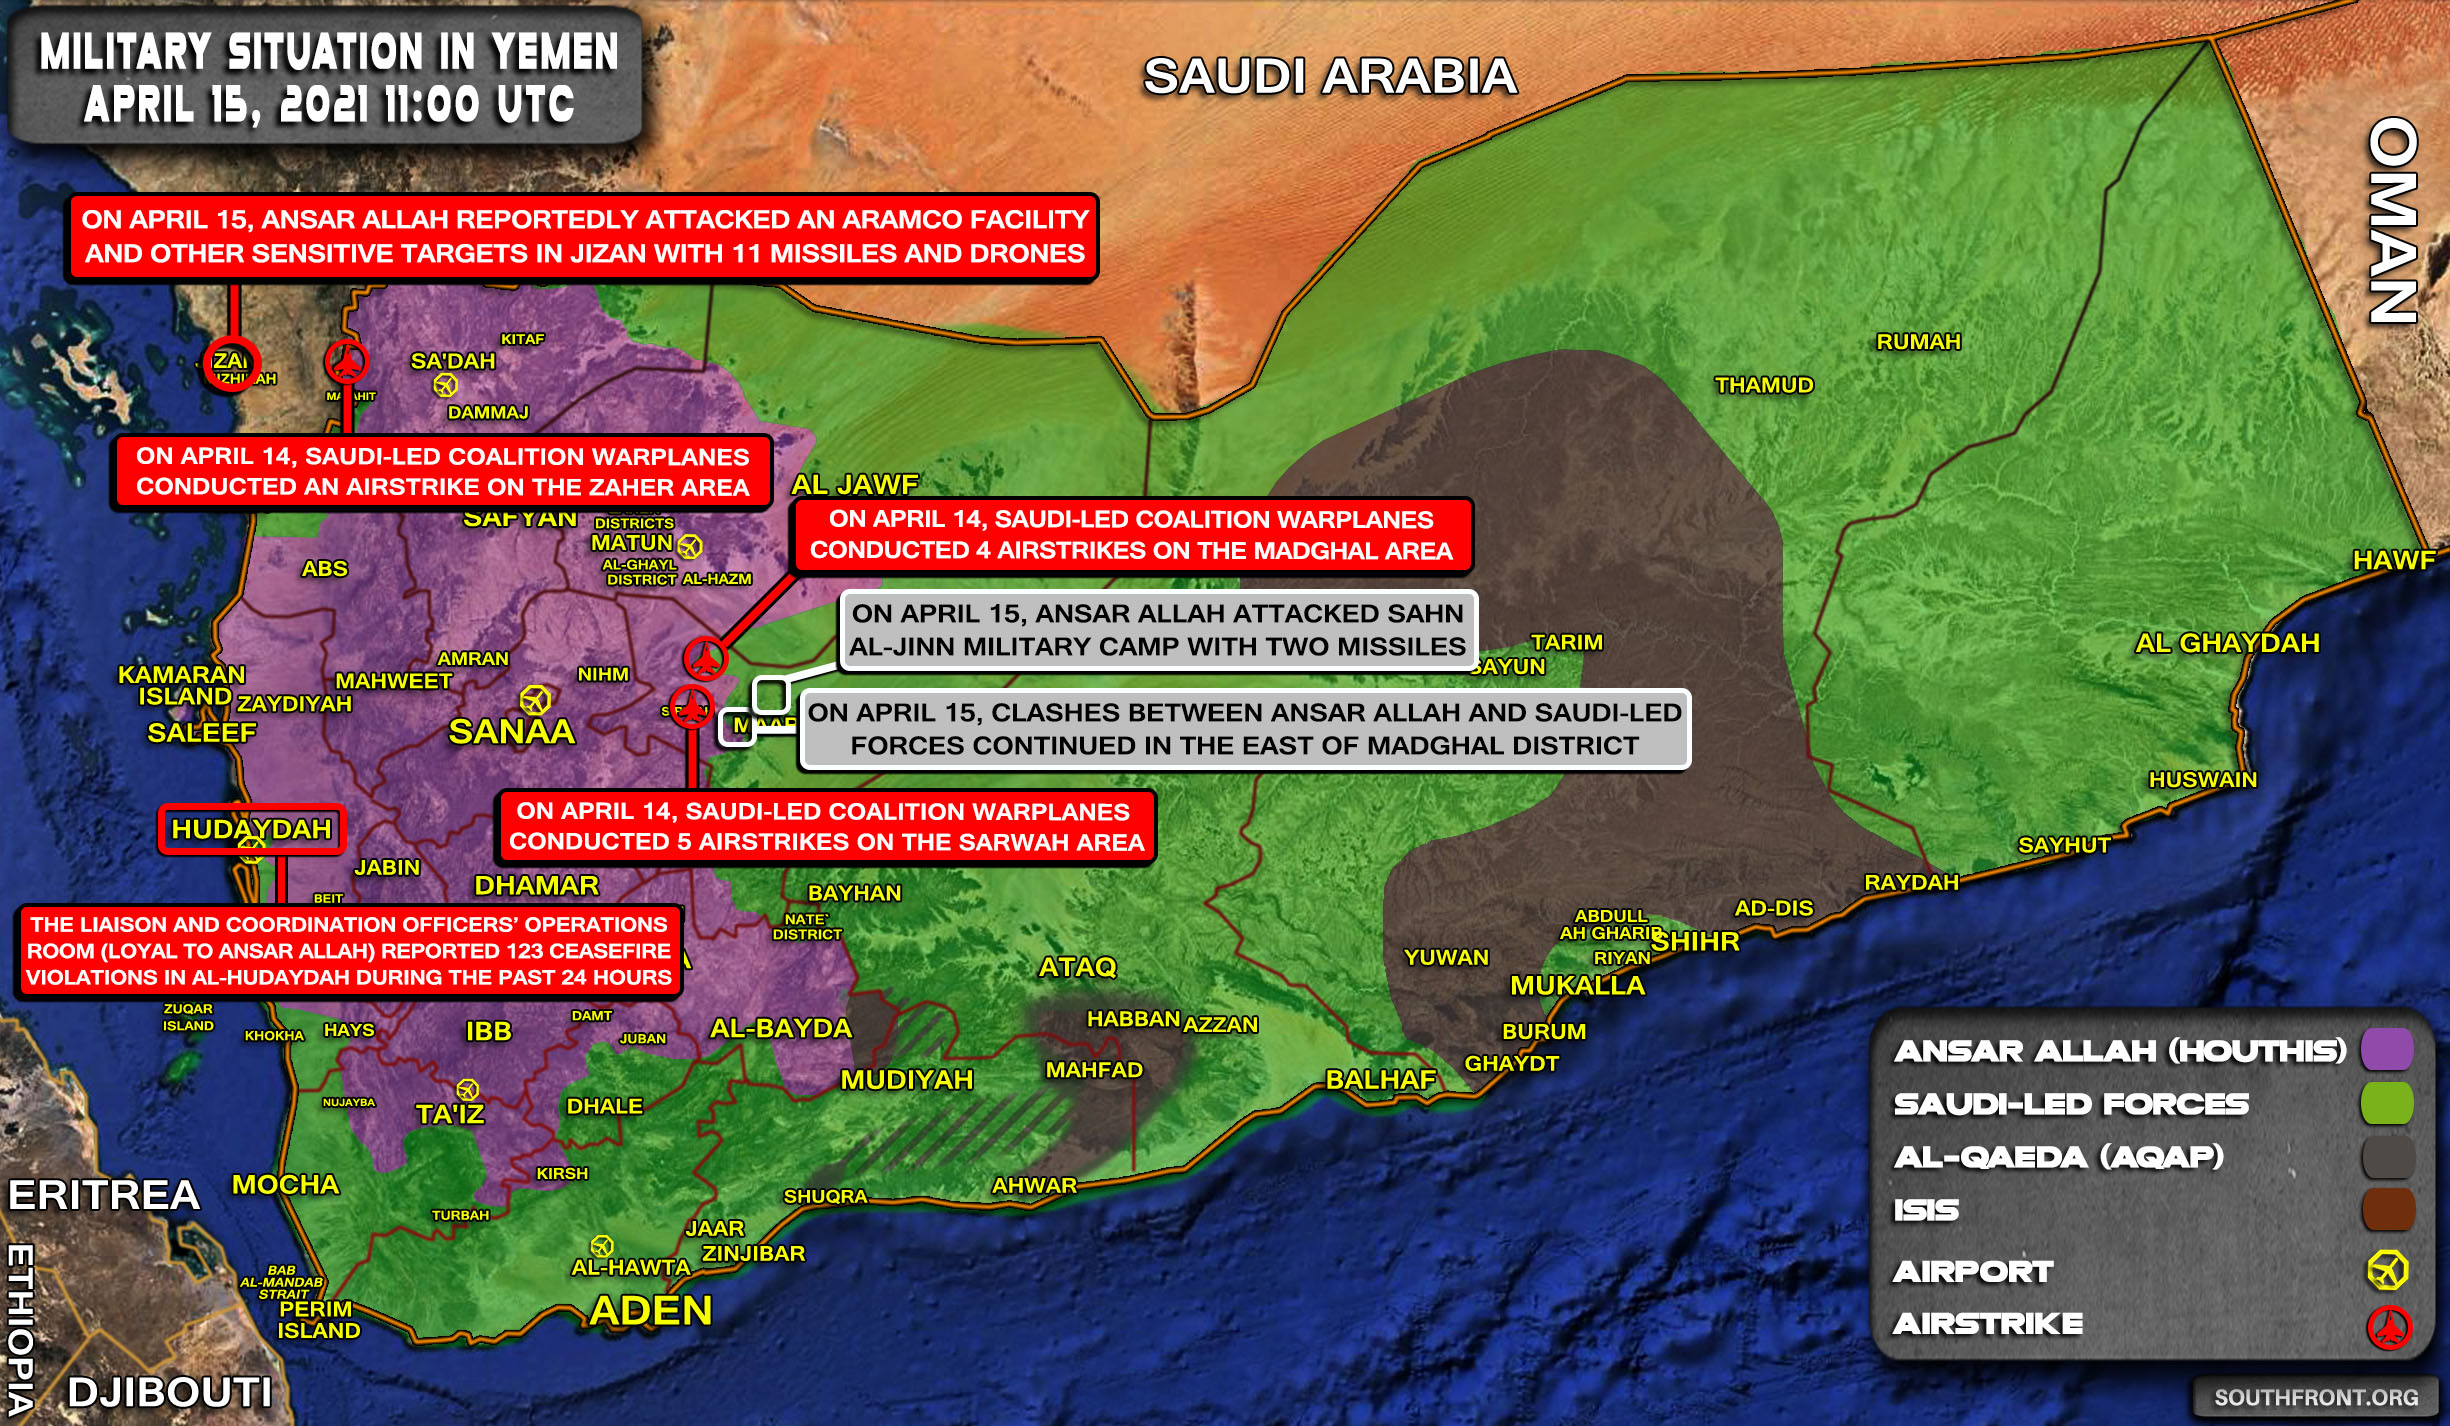 Houthis Targeted Oil Facilities, Patriot Systems In Saudi Arabia With 11 Drones & Missiles (Video, Map Update)